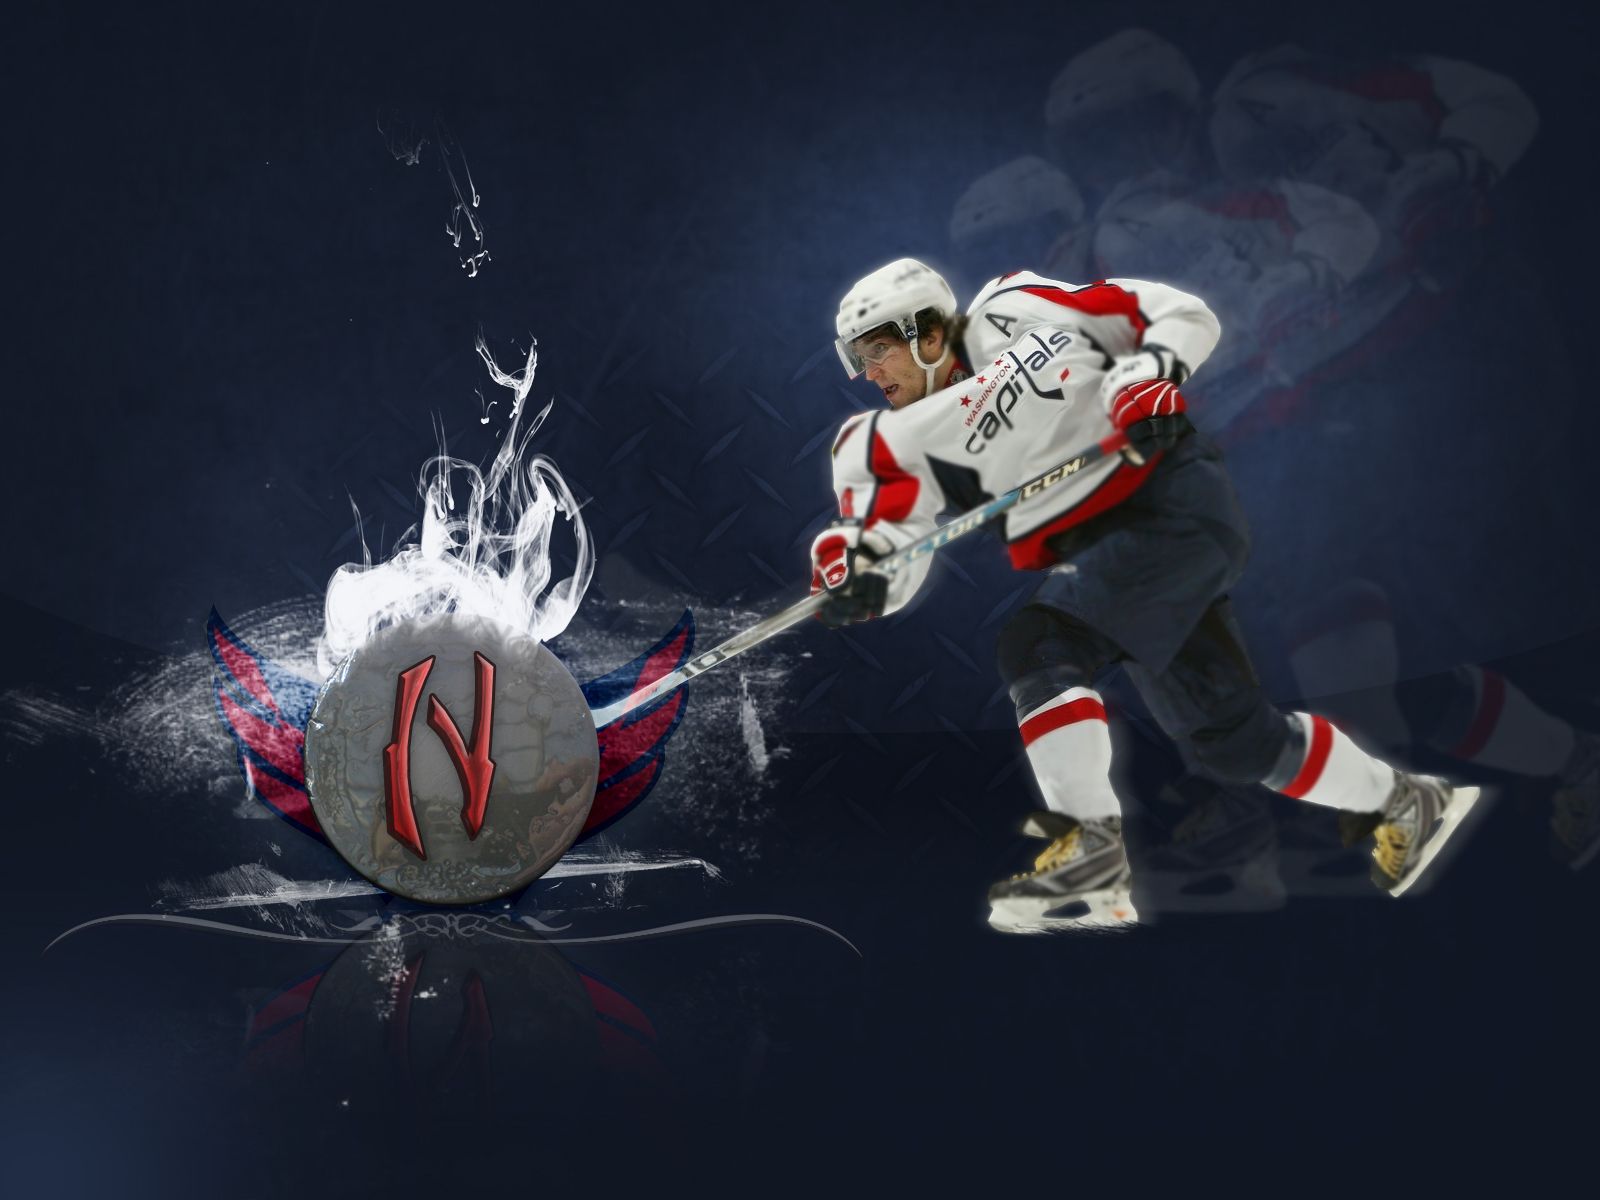 Hockey player Alexander Ovechkin wallpapers and images ...